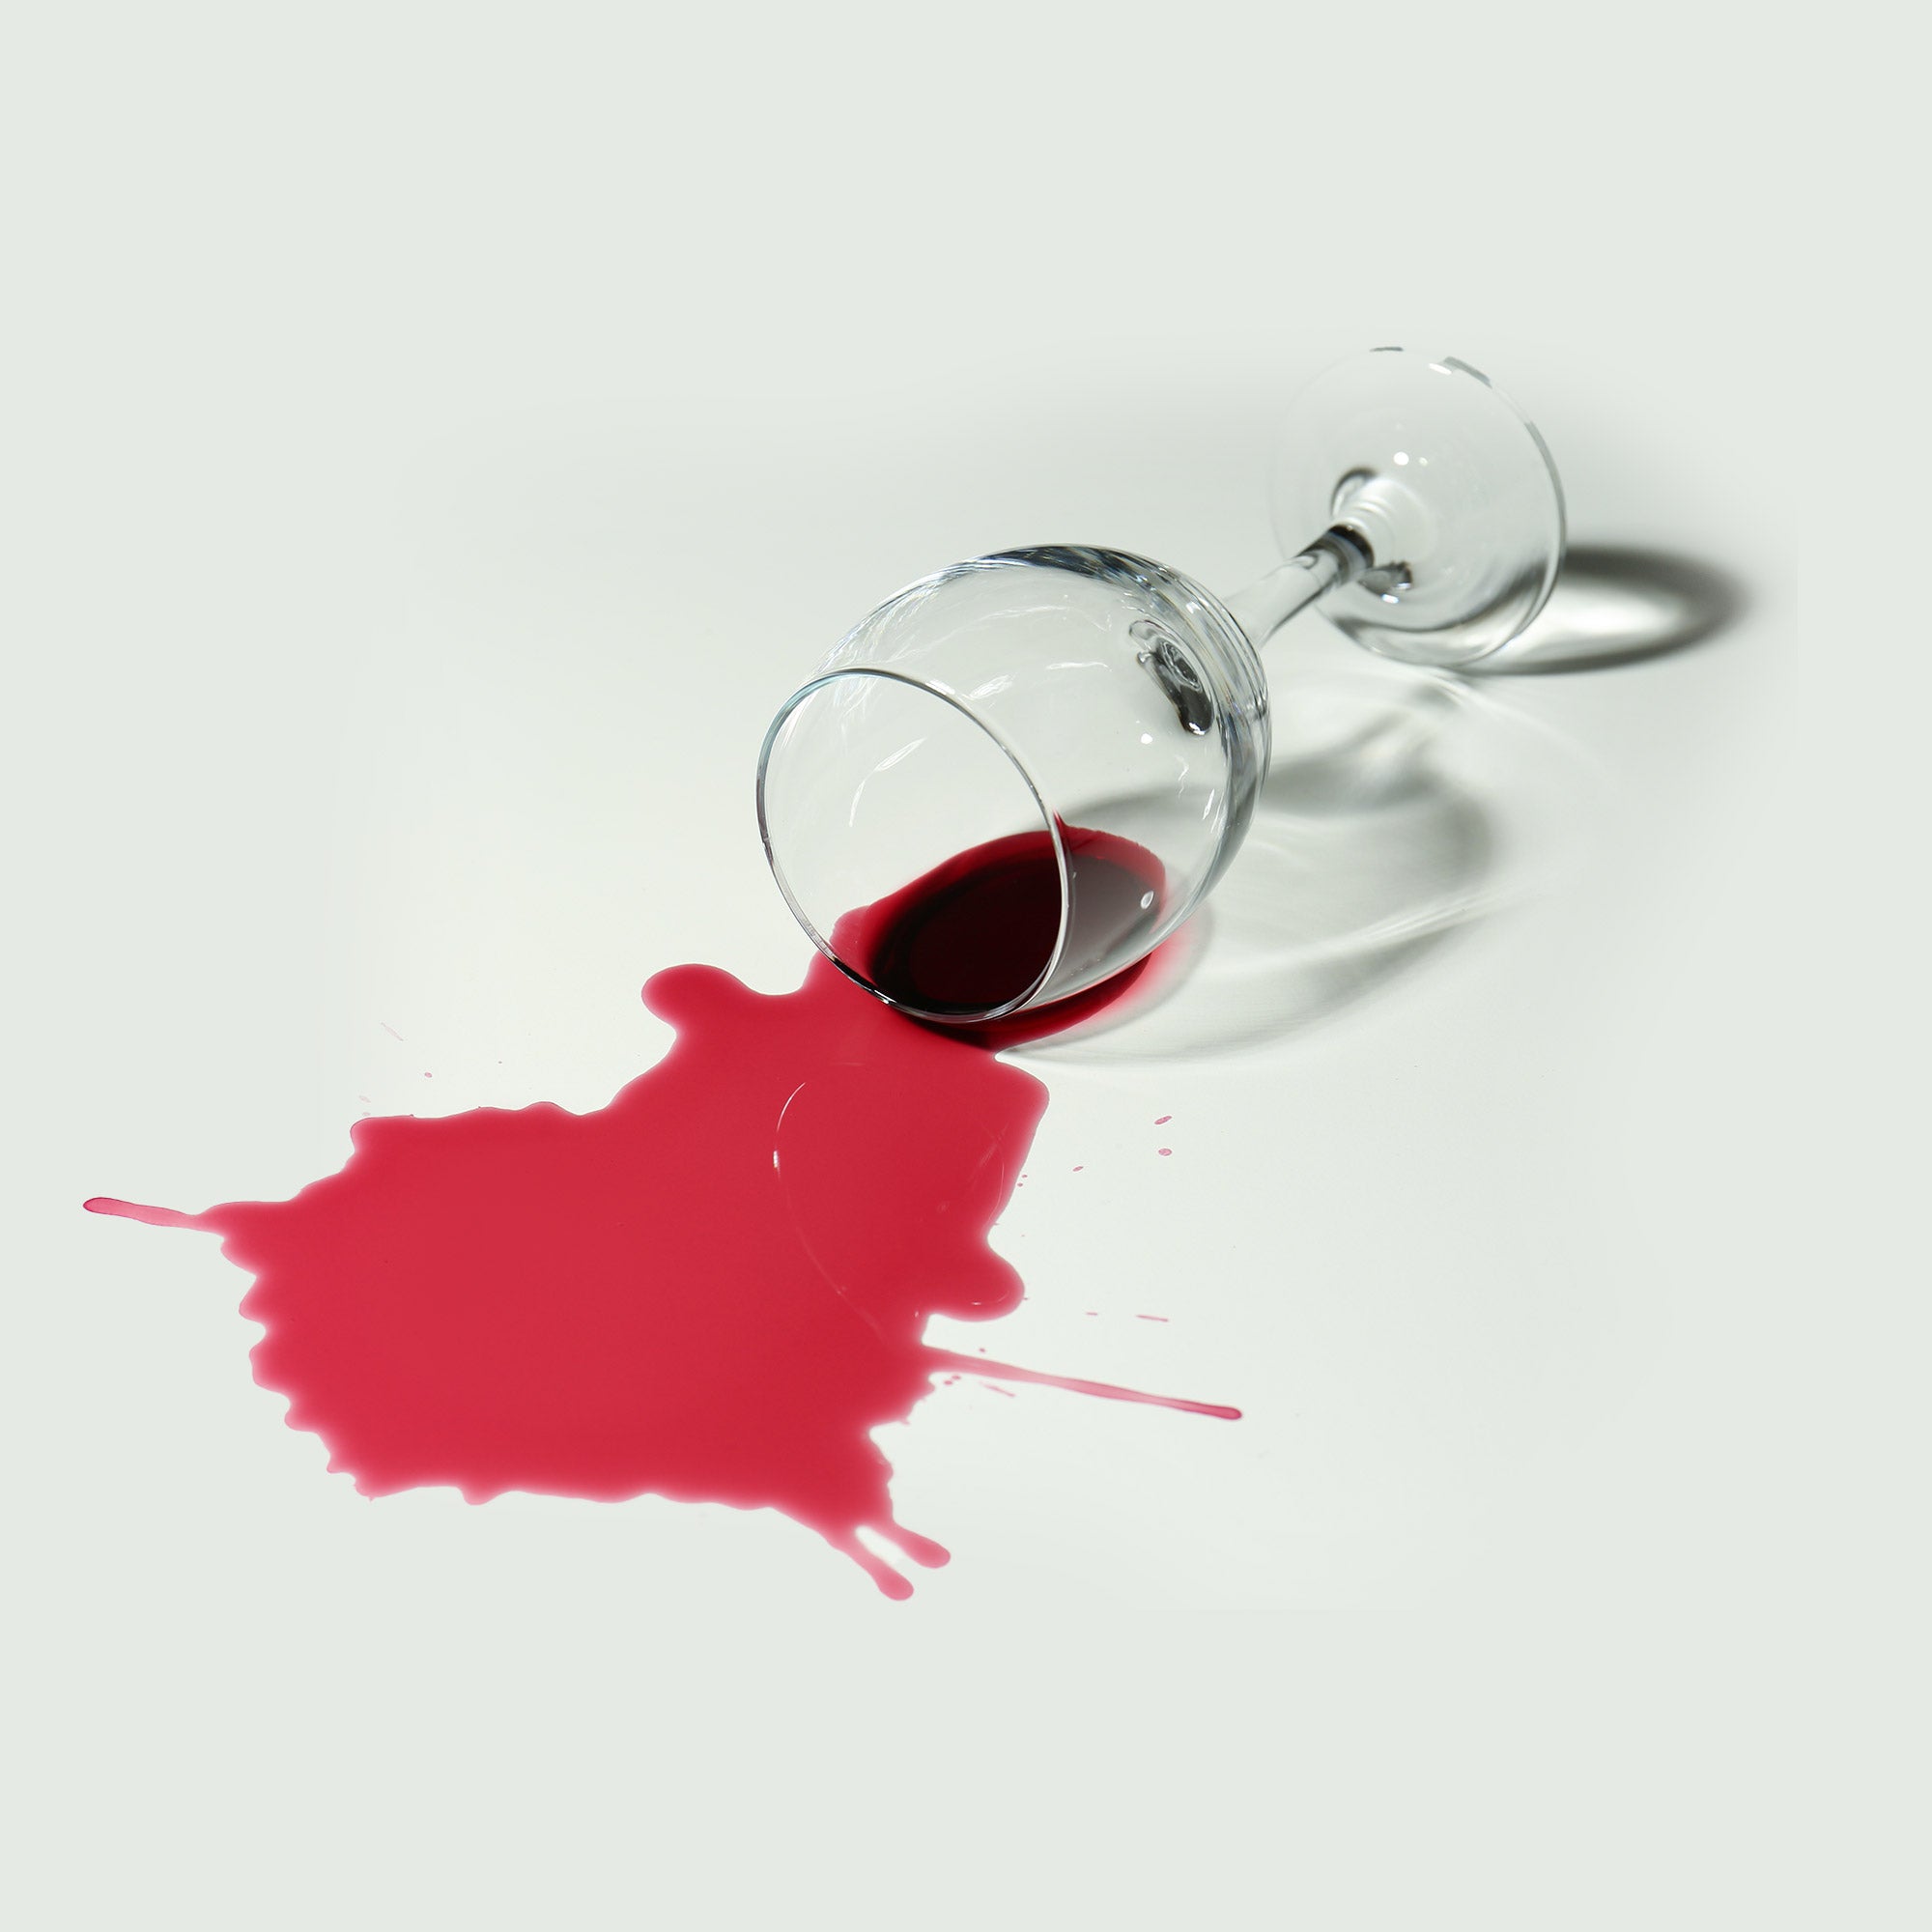 A spilt glass of red wine.